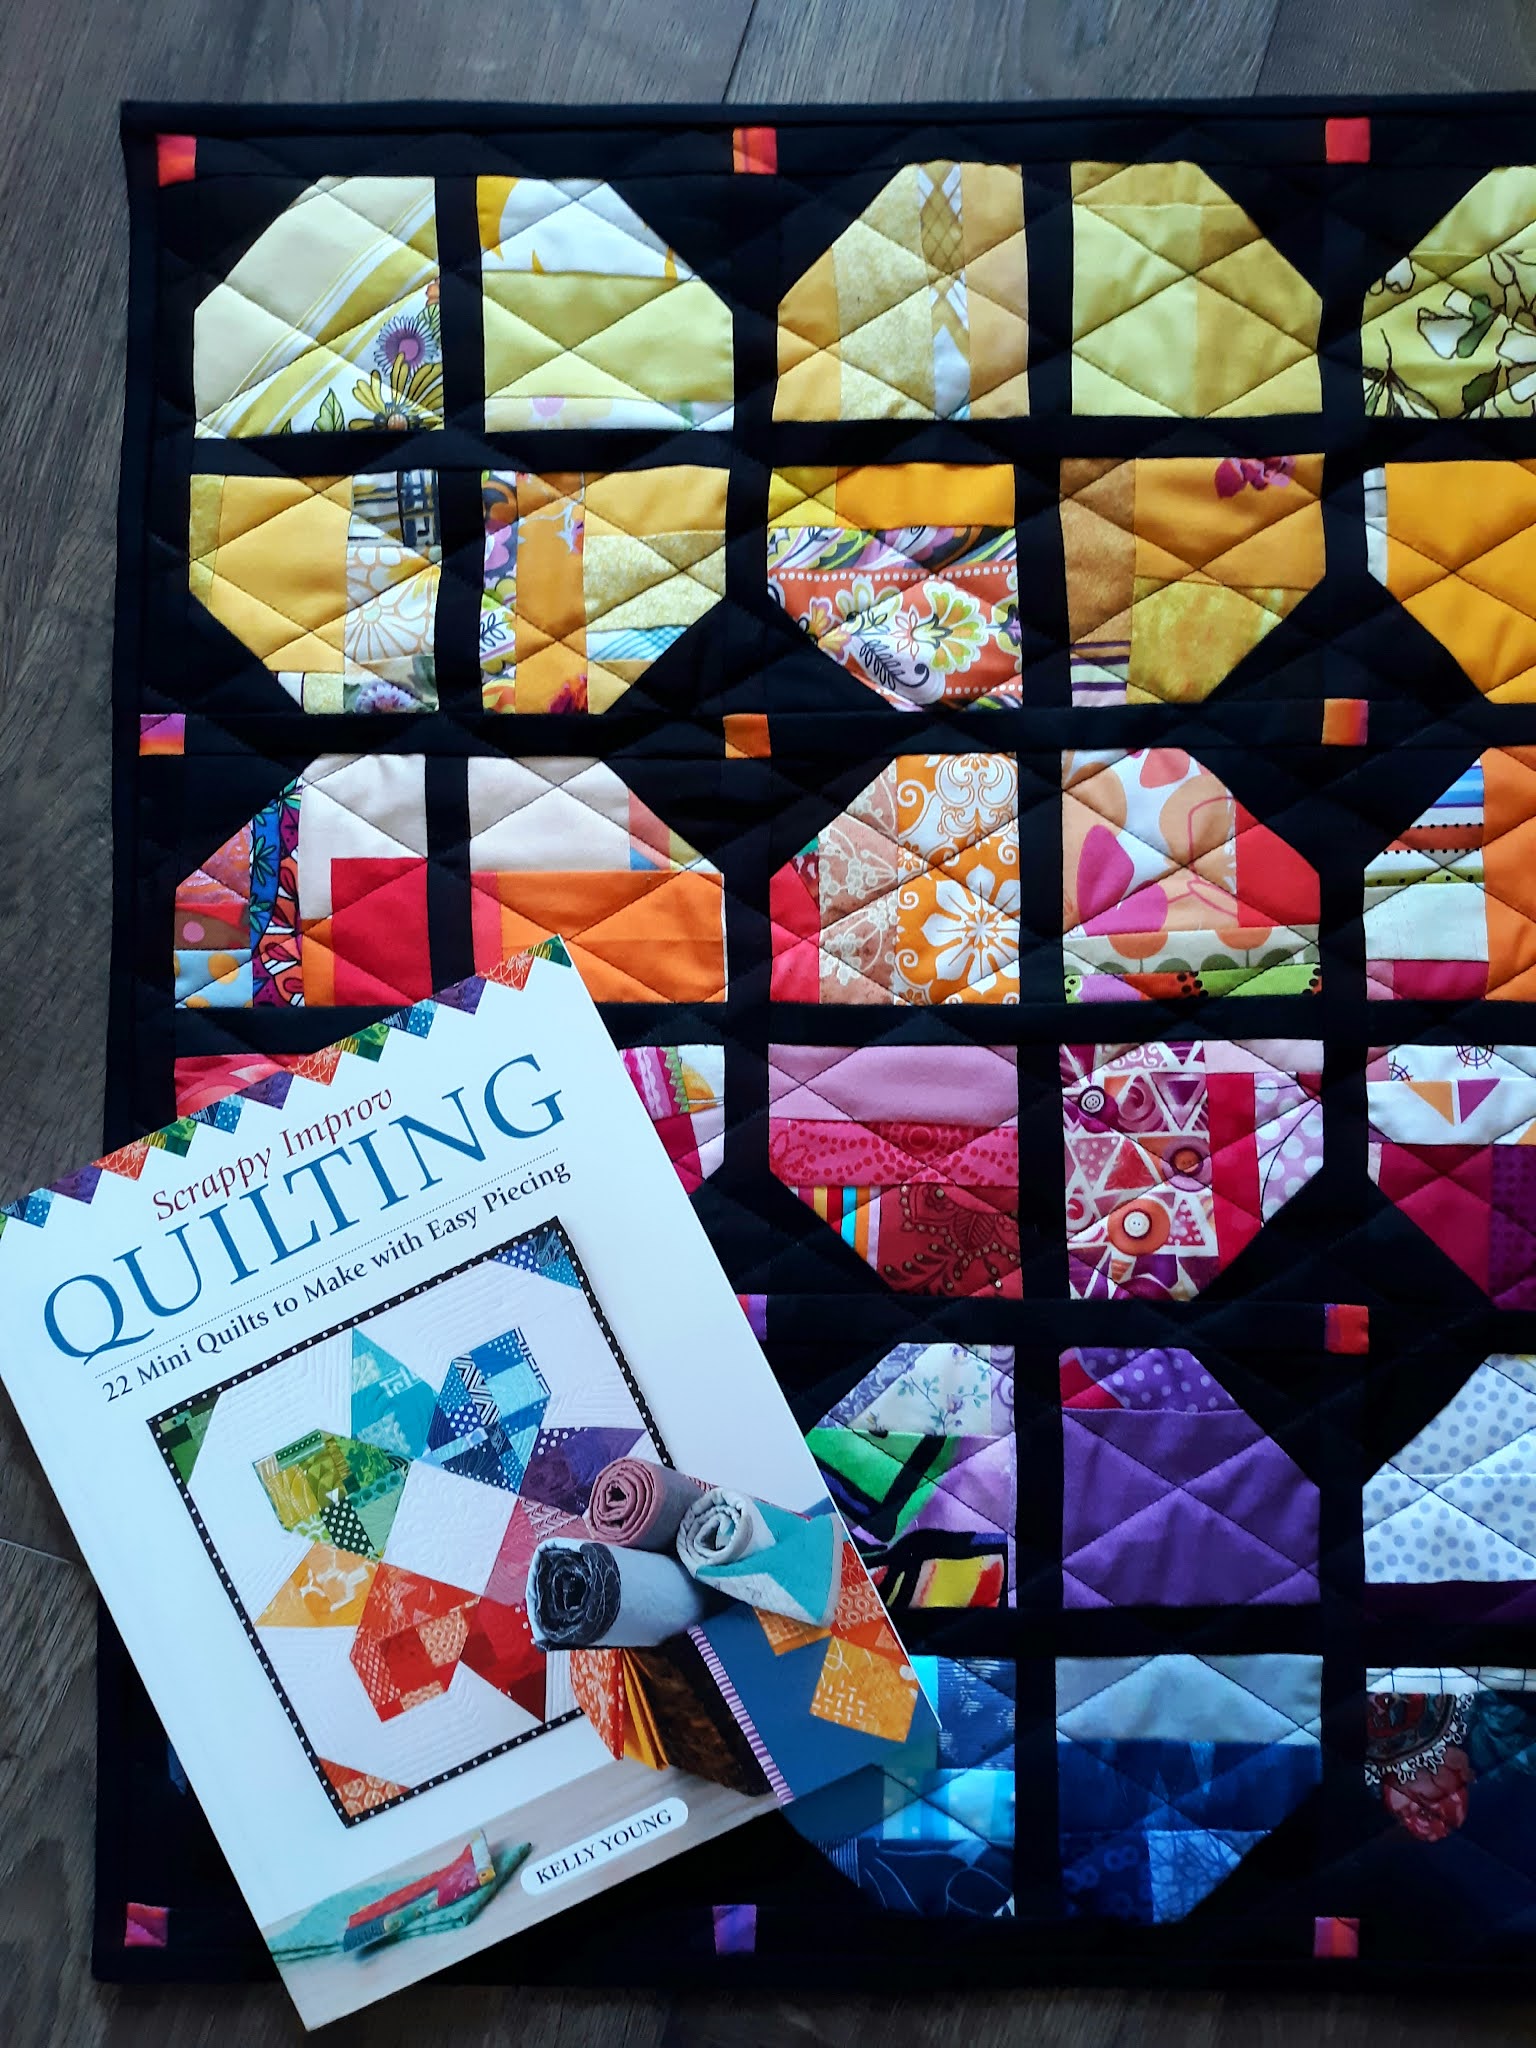 My turn forBlog Hop for Scrappy Improv Quilting